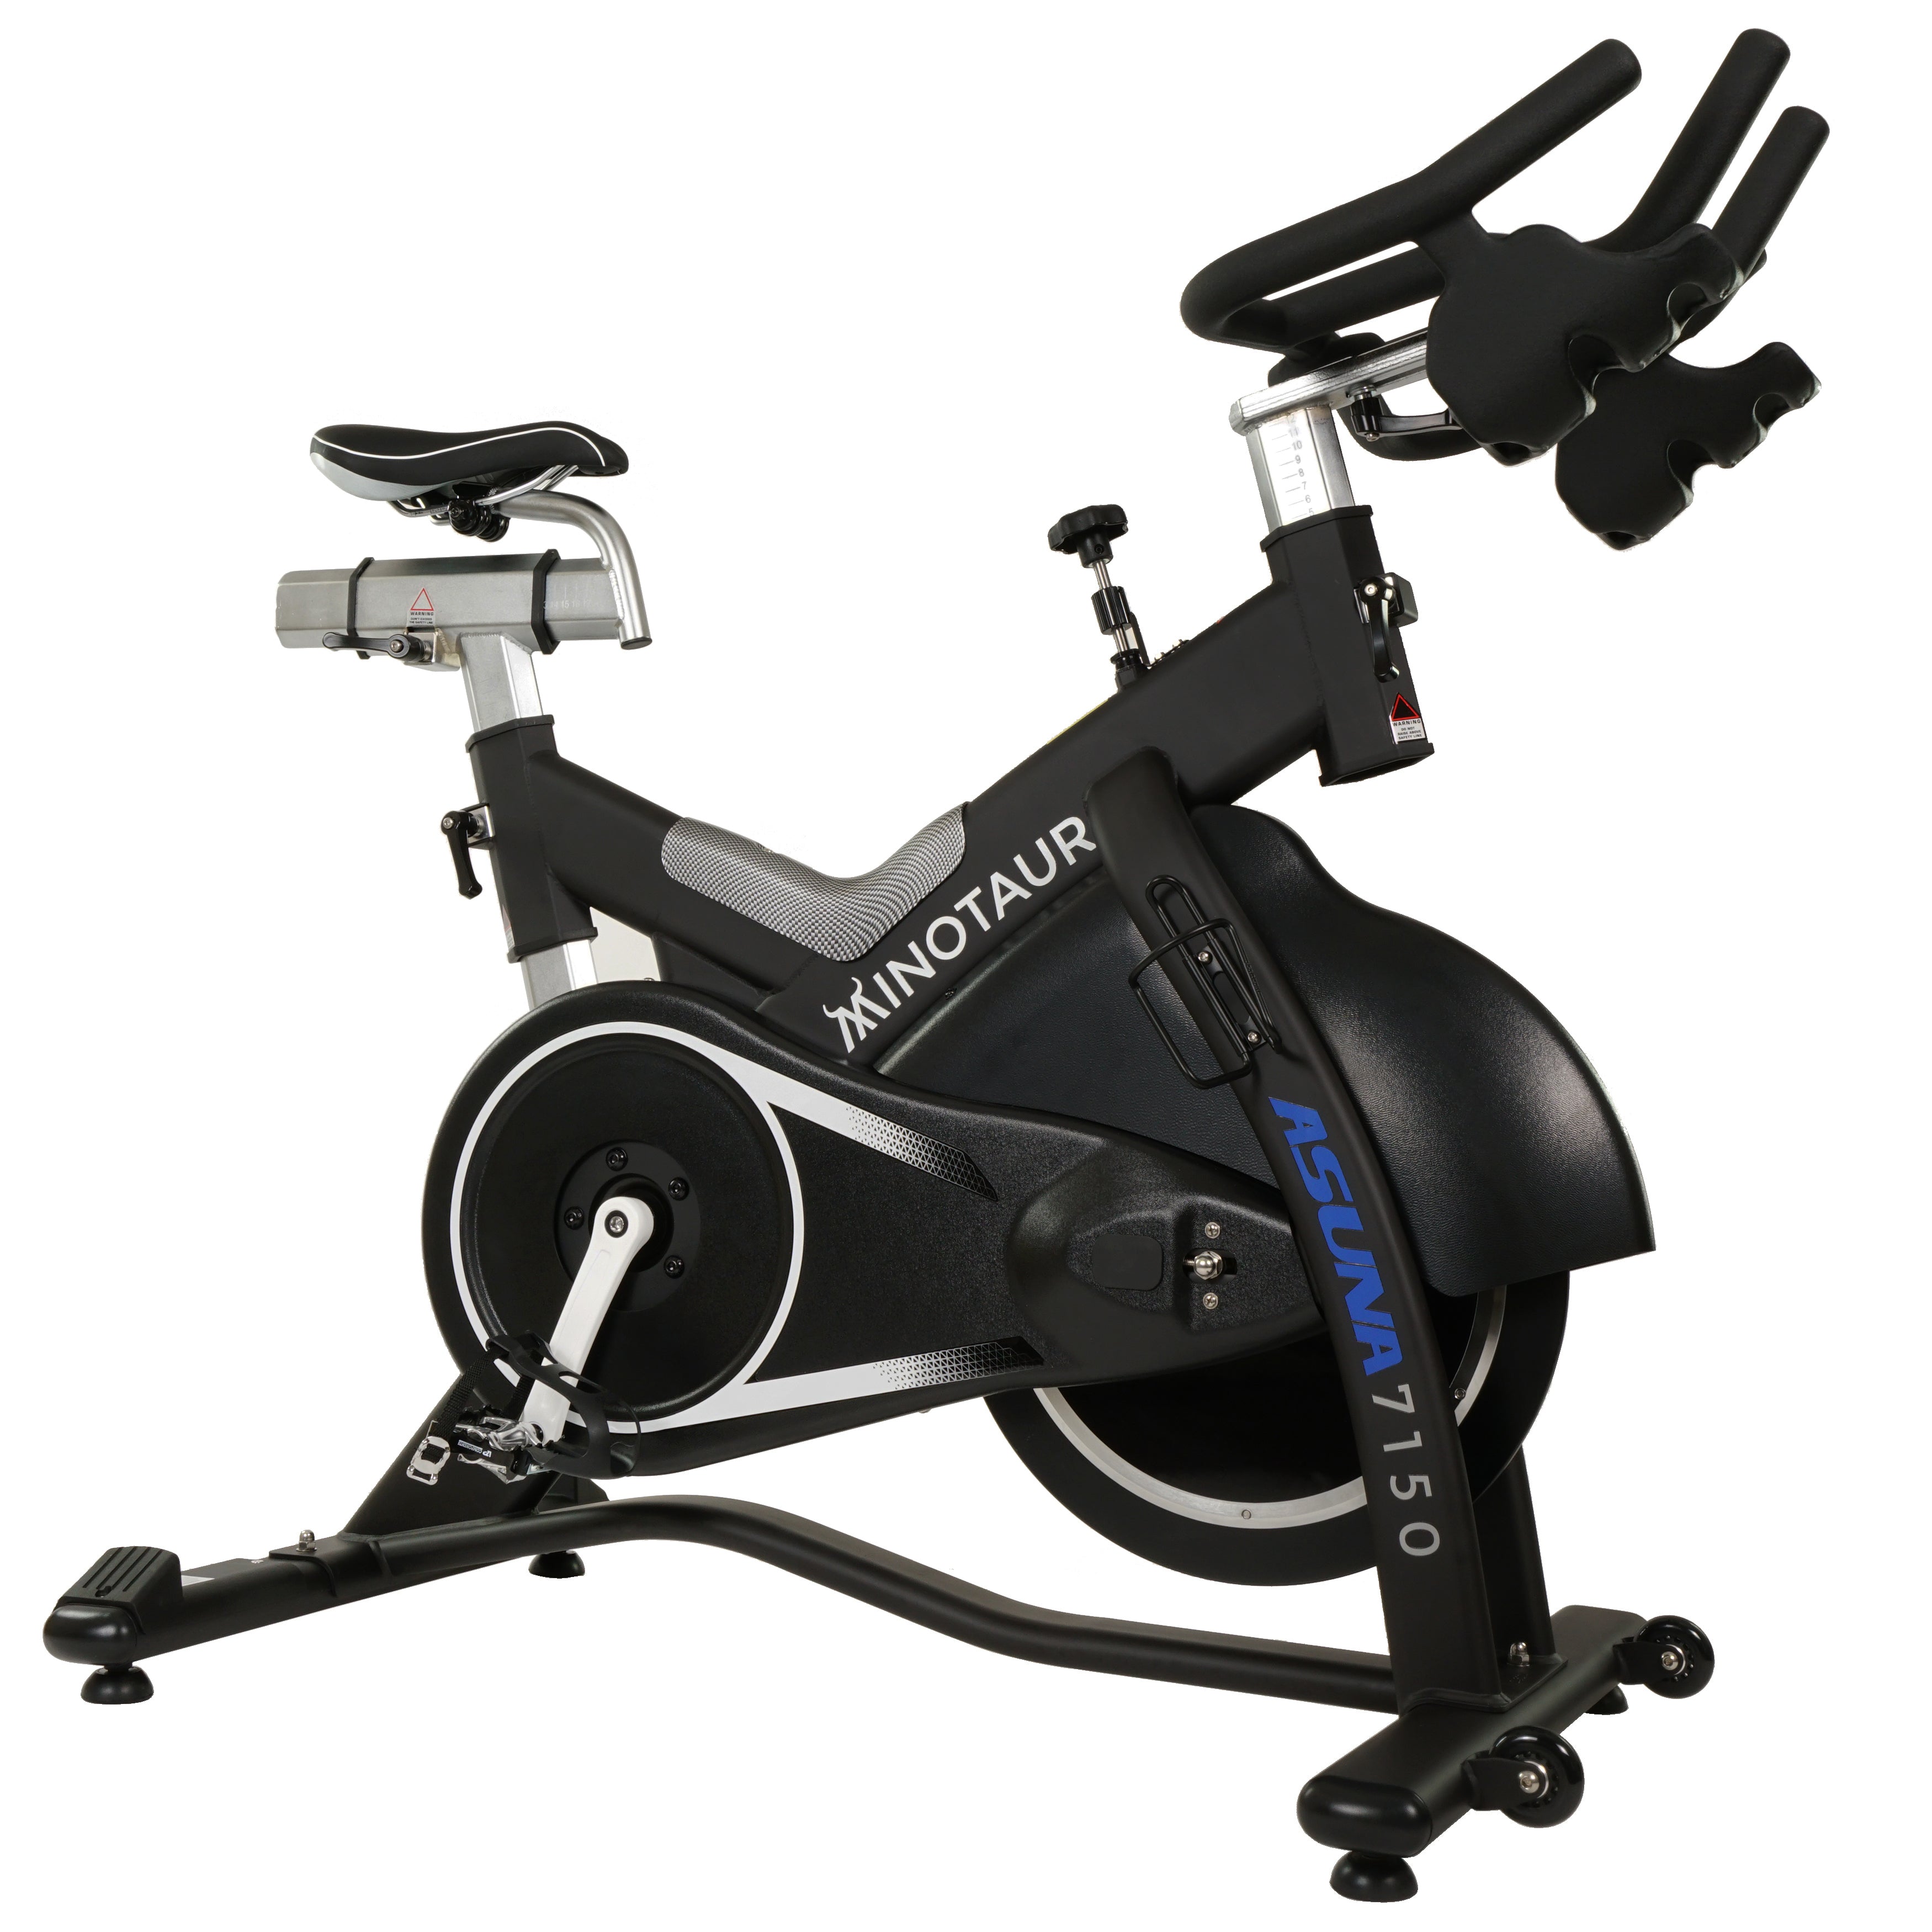 ASUNA 7150 Minotaur Magnetic Commercial Indoor Cycling Bike